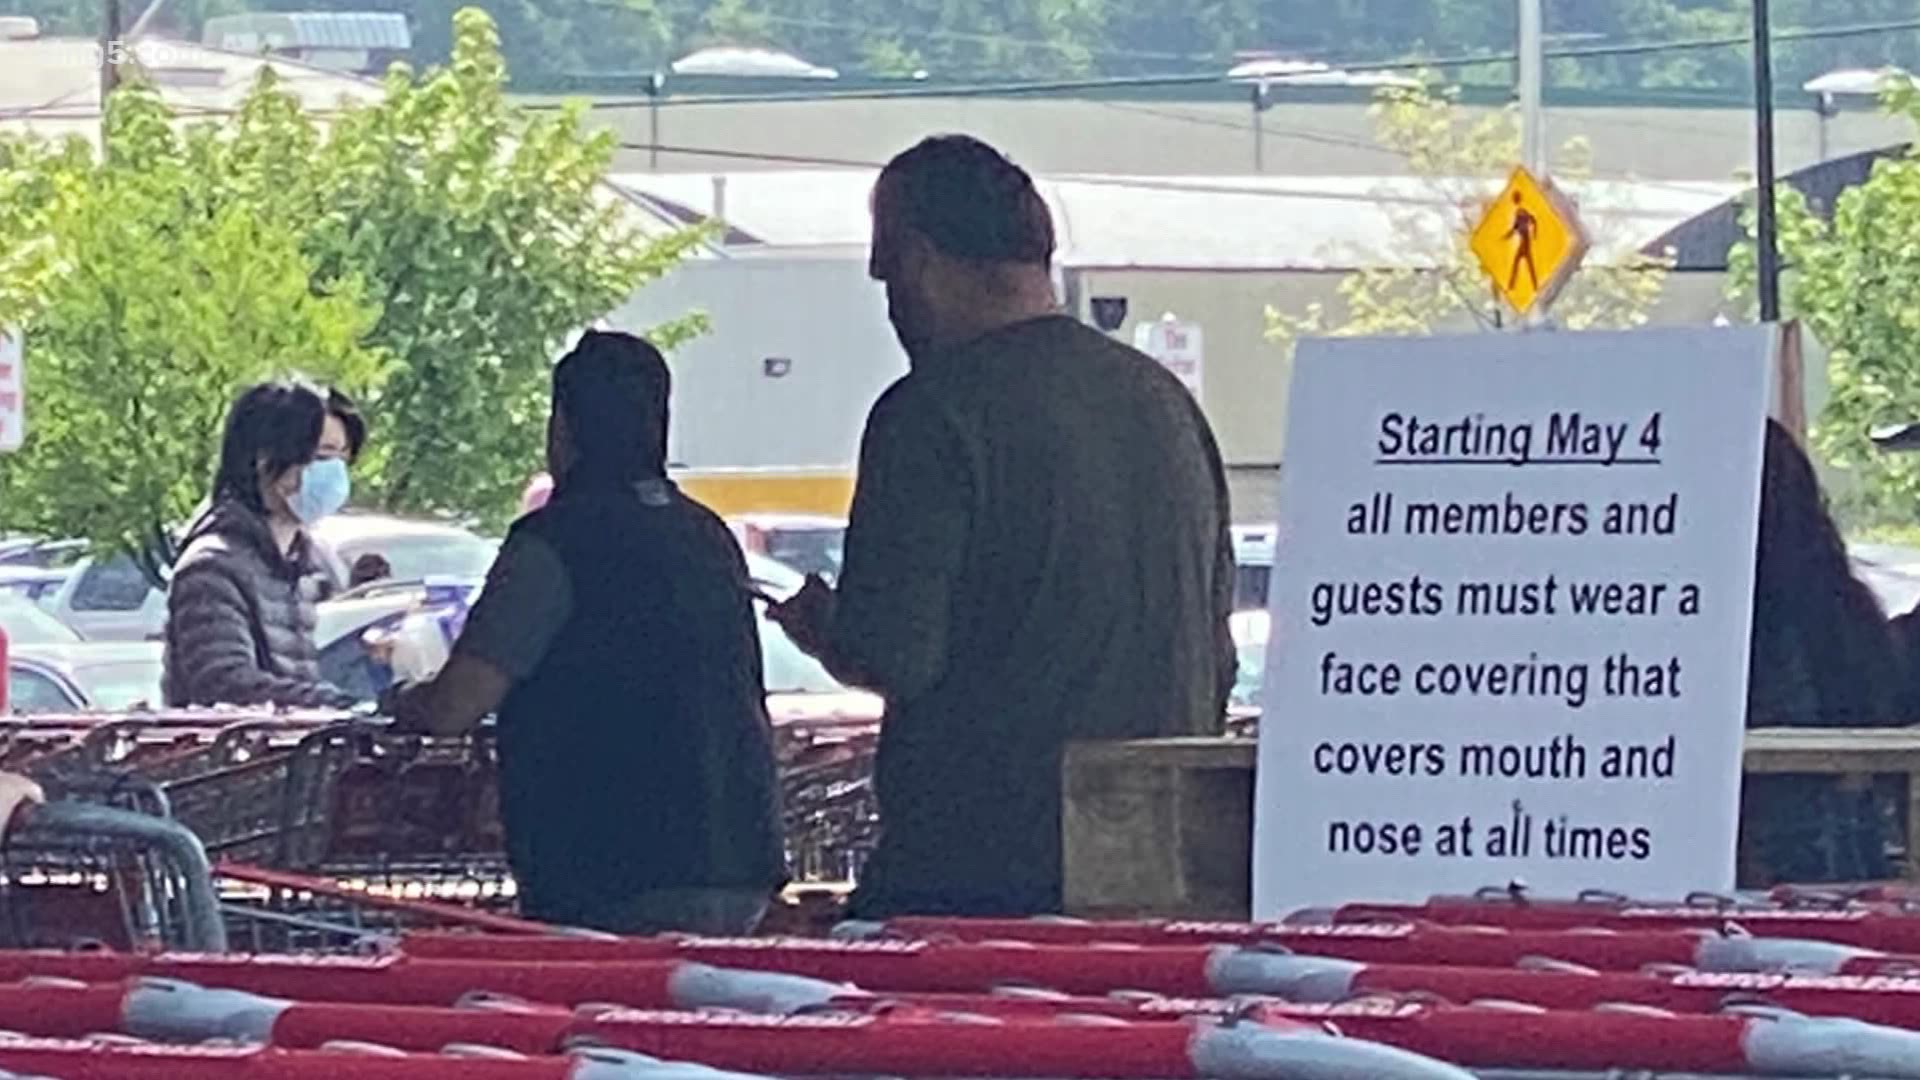 Washington State Department of Health recommends wearing a mask in public places where social distancing is difficult, but now Costco is mandating masks.